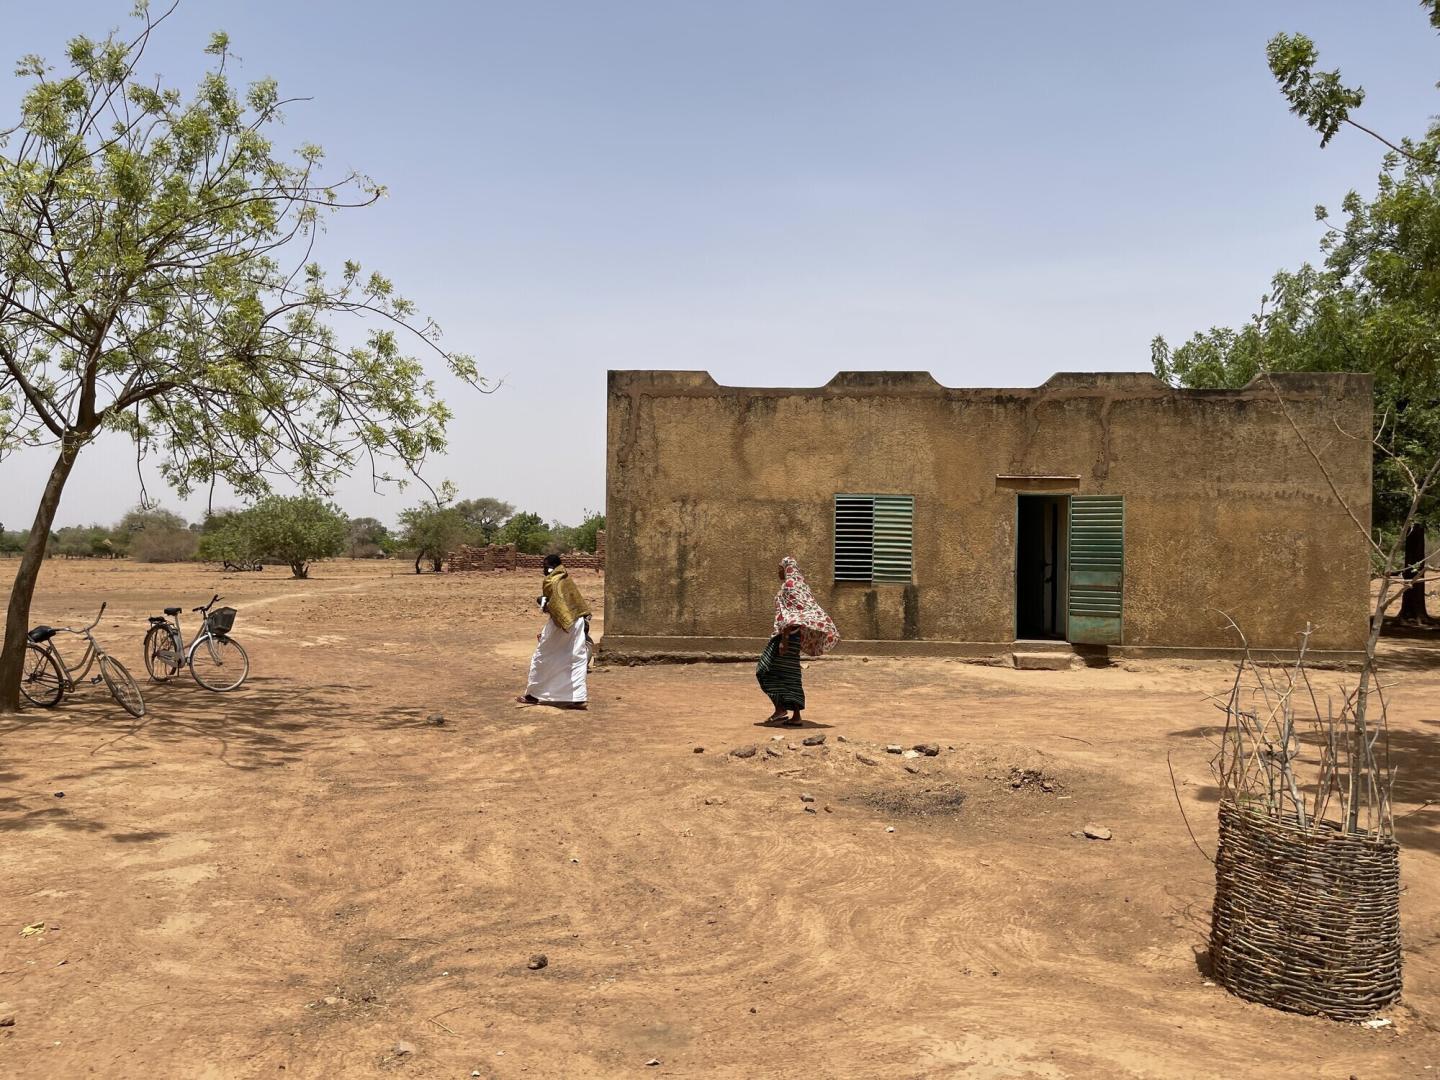 Two people walk past a building in rural Burkina Faso